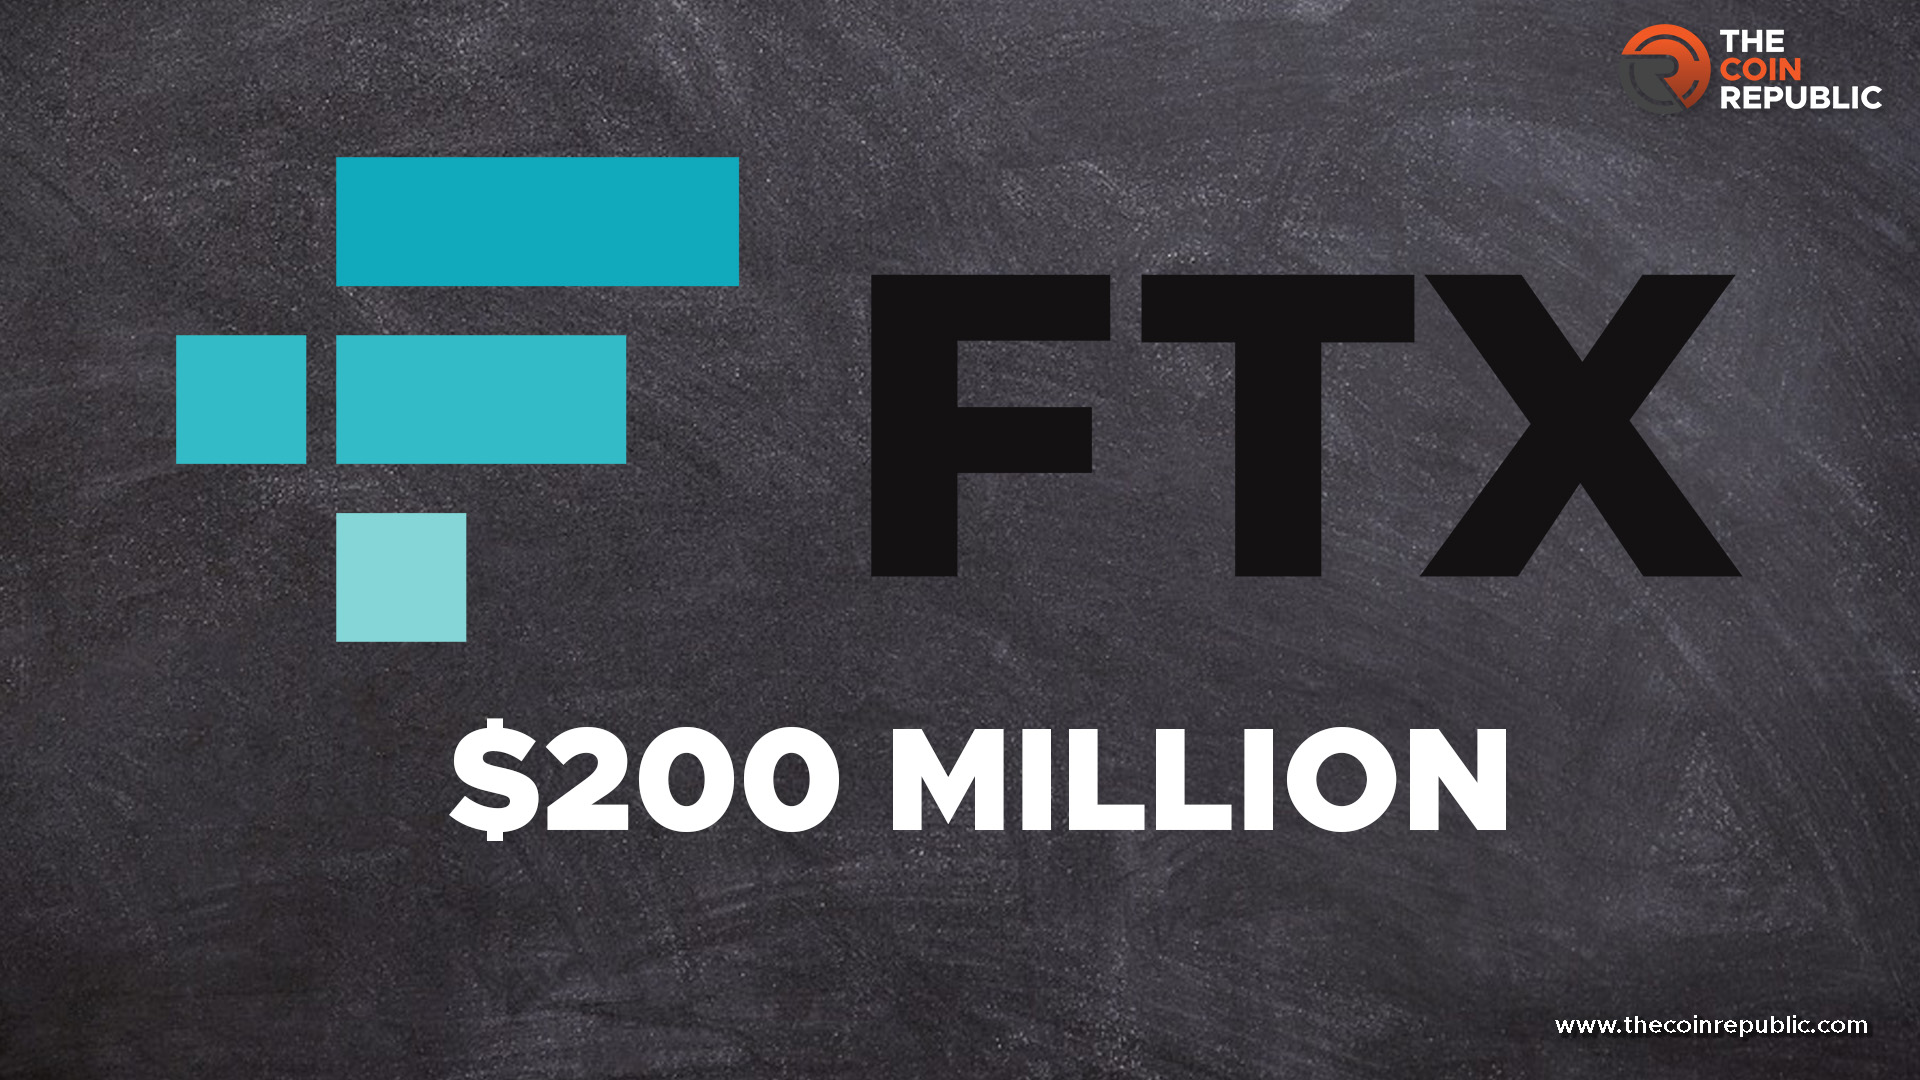 FTX Investments in Two Companies Via Users Funds Draws SEC Attention 